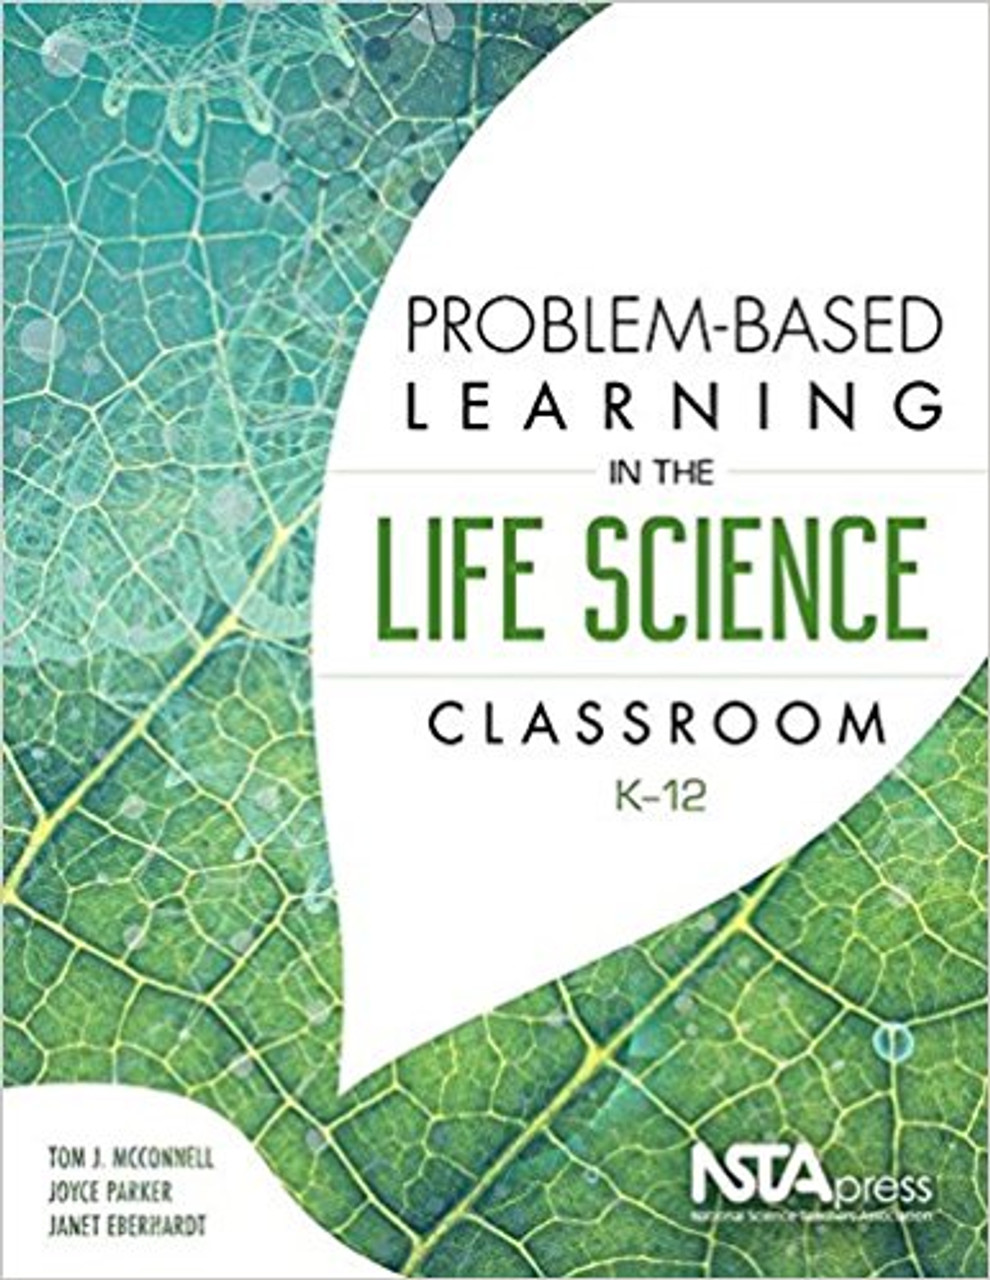 Problem-Based Learning in the Life Science Classroom, K-12 by Tom McConnell